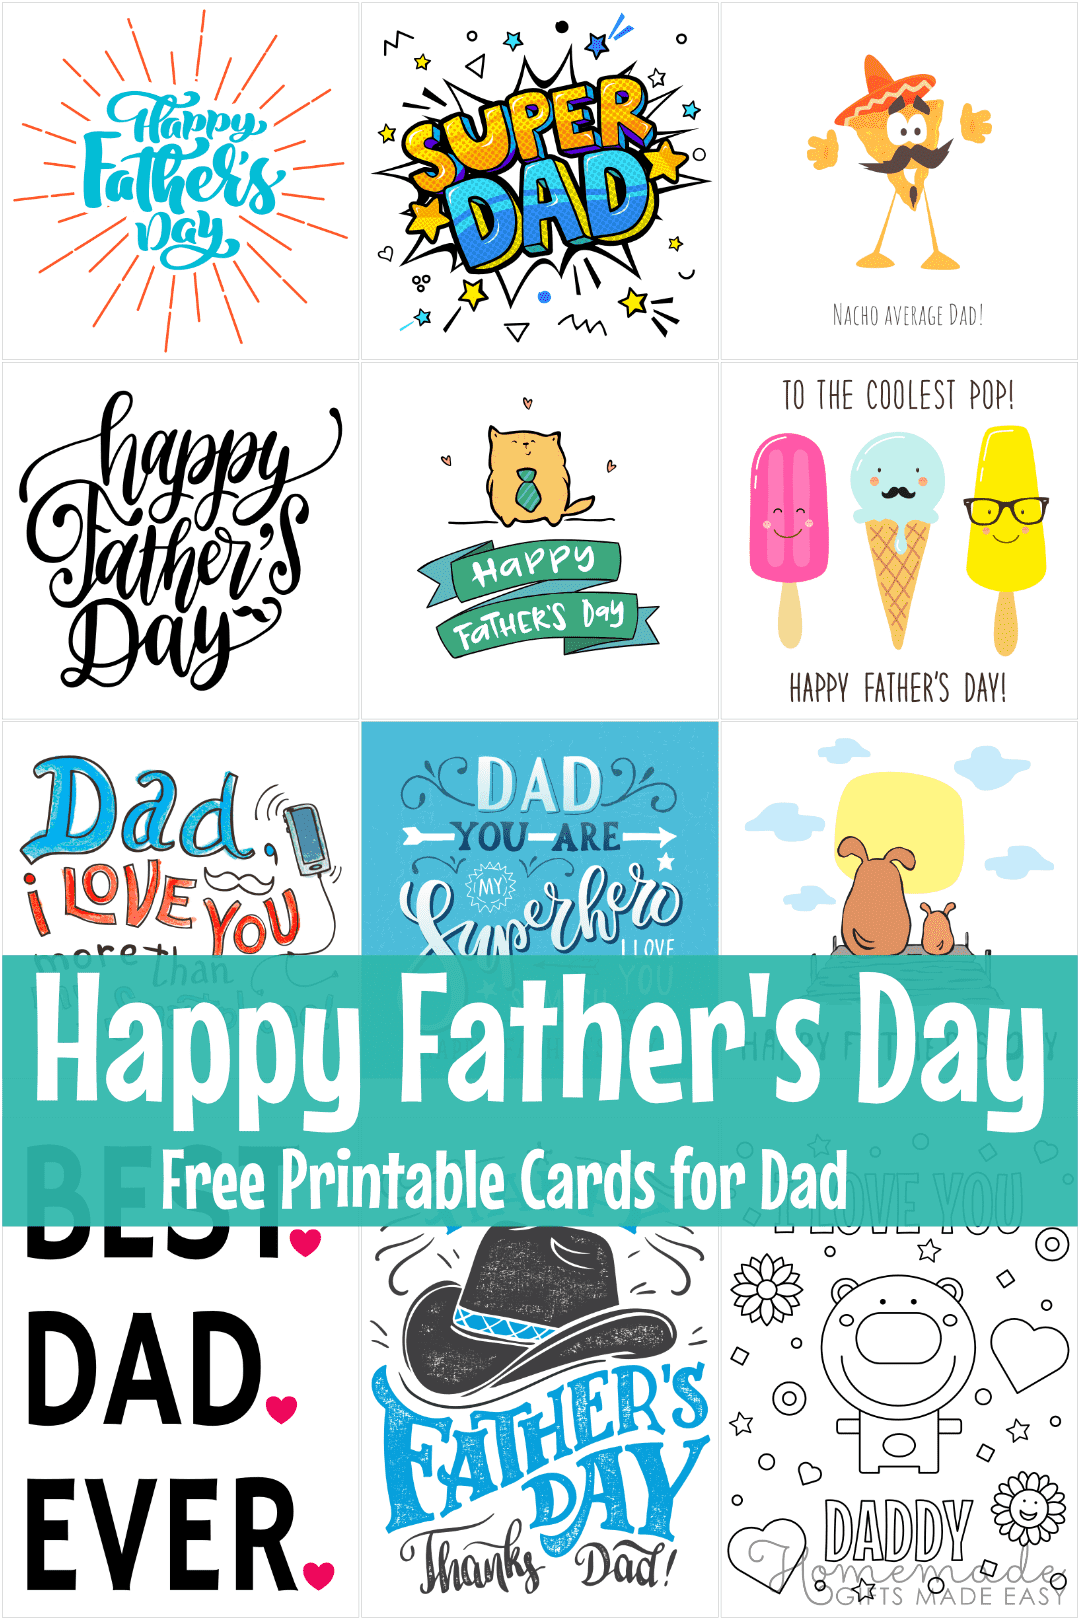 funny-fathers-day-poems-from-friend-lowery-cauther